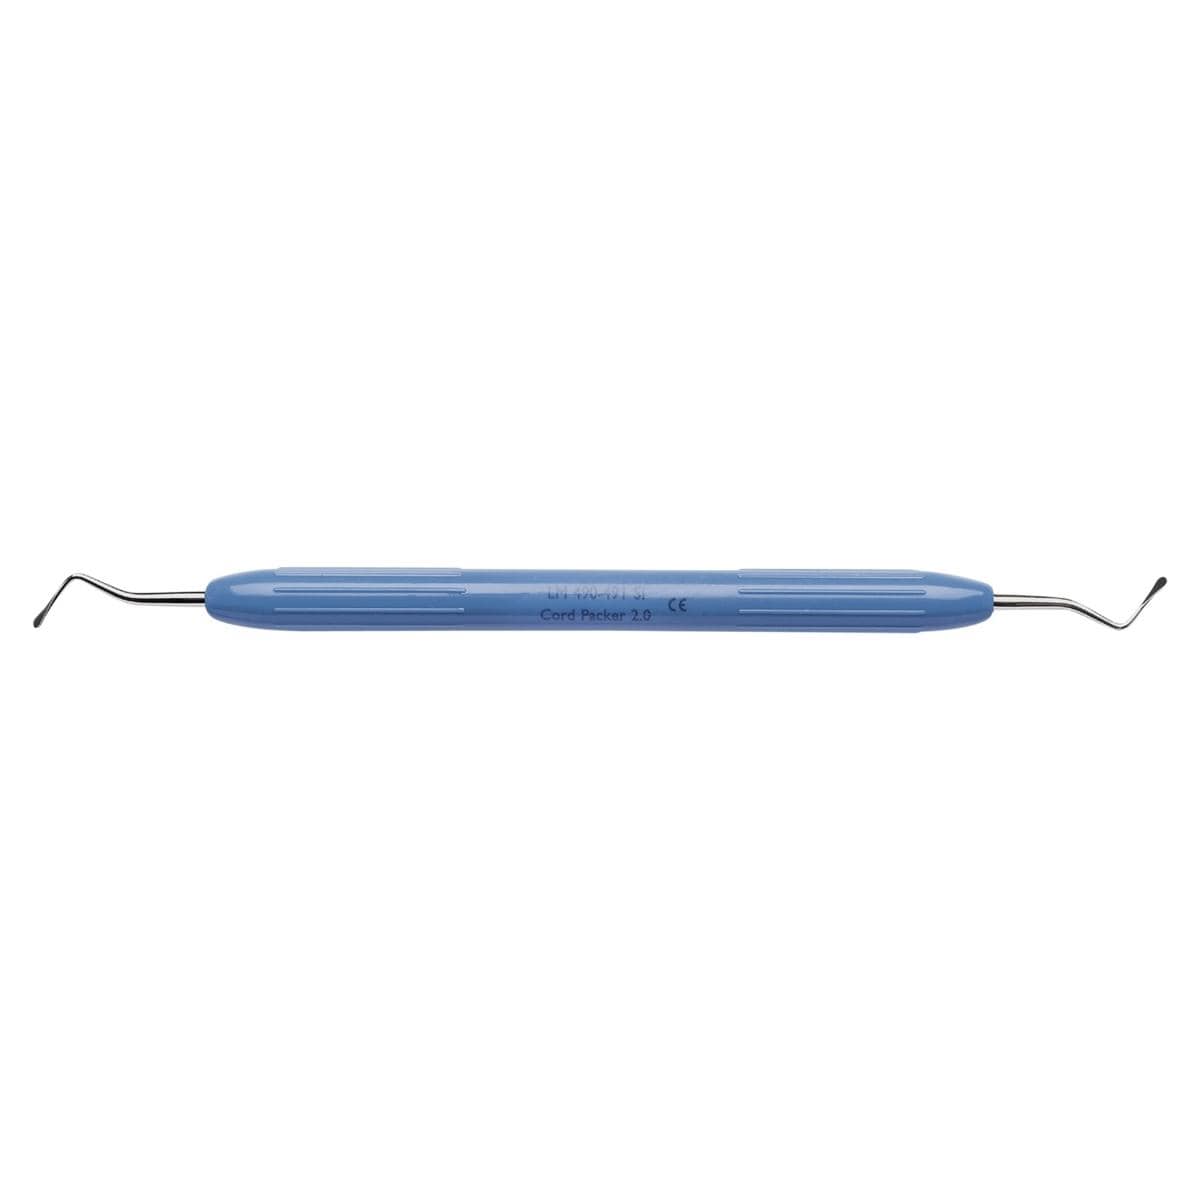 Cord Packer - 490-491 SI, 2.0 mm ErgoNorm